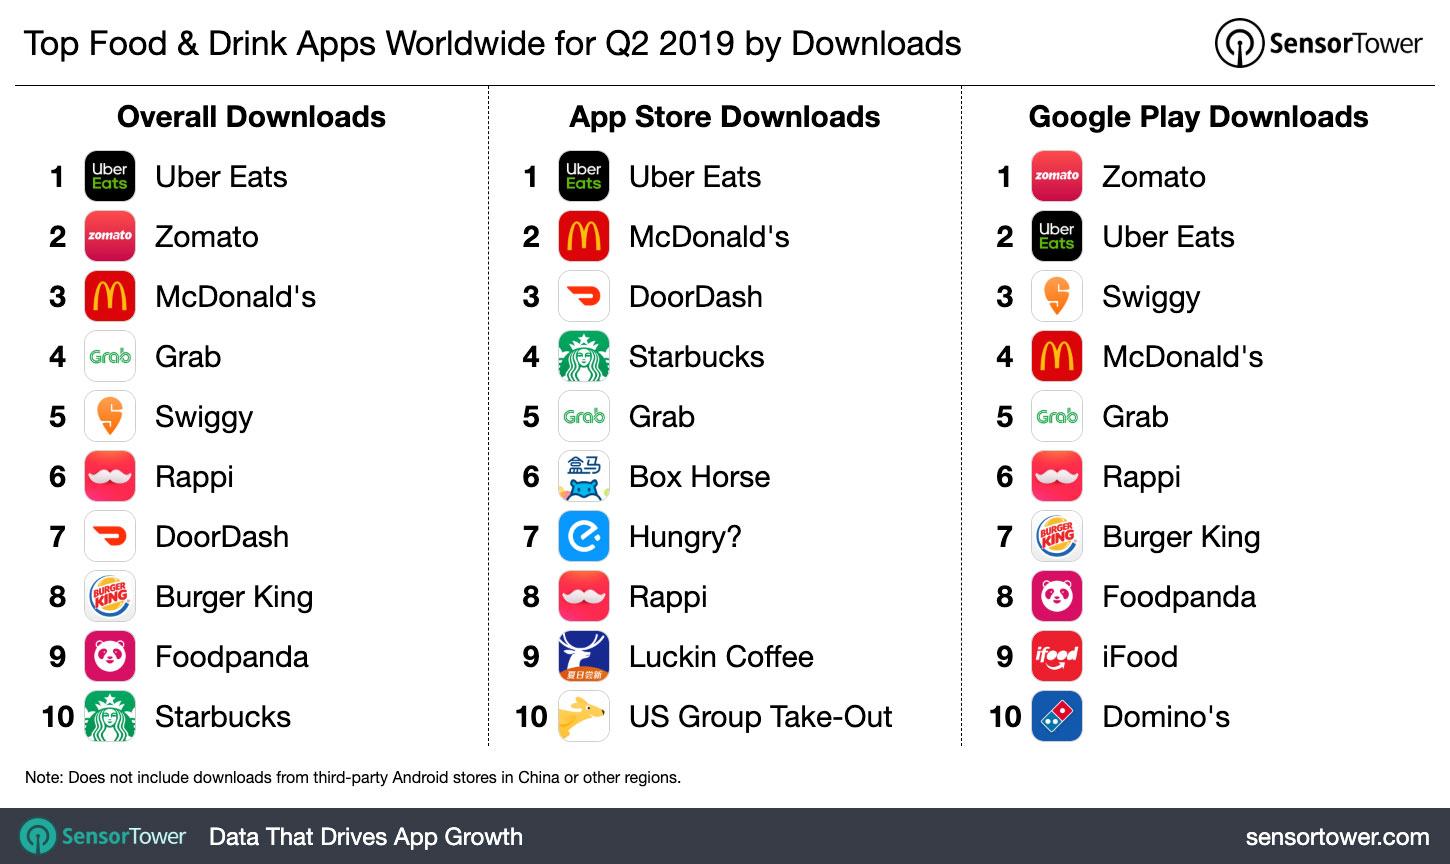 Top Food & Drink Category Apps Worldwide for Q2 2019 by Downloads